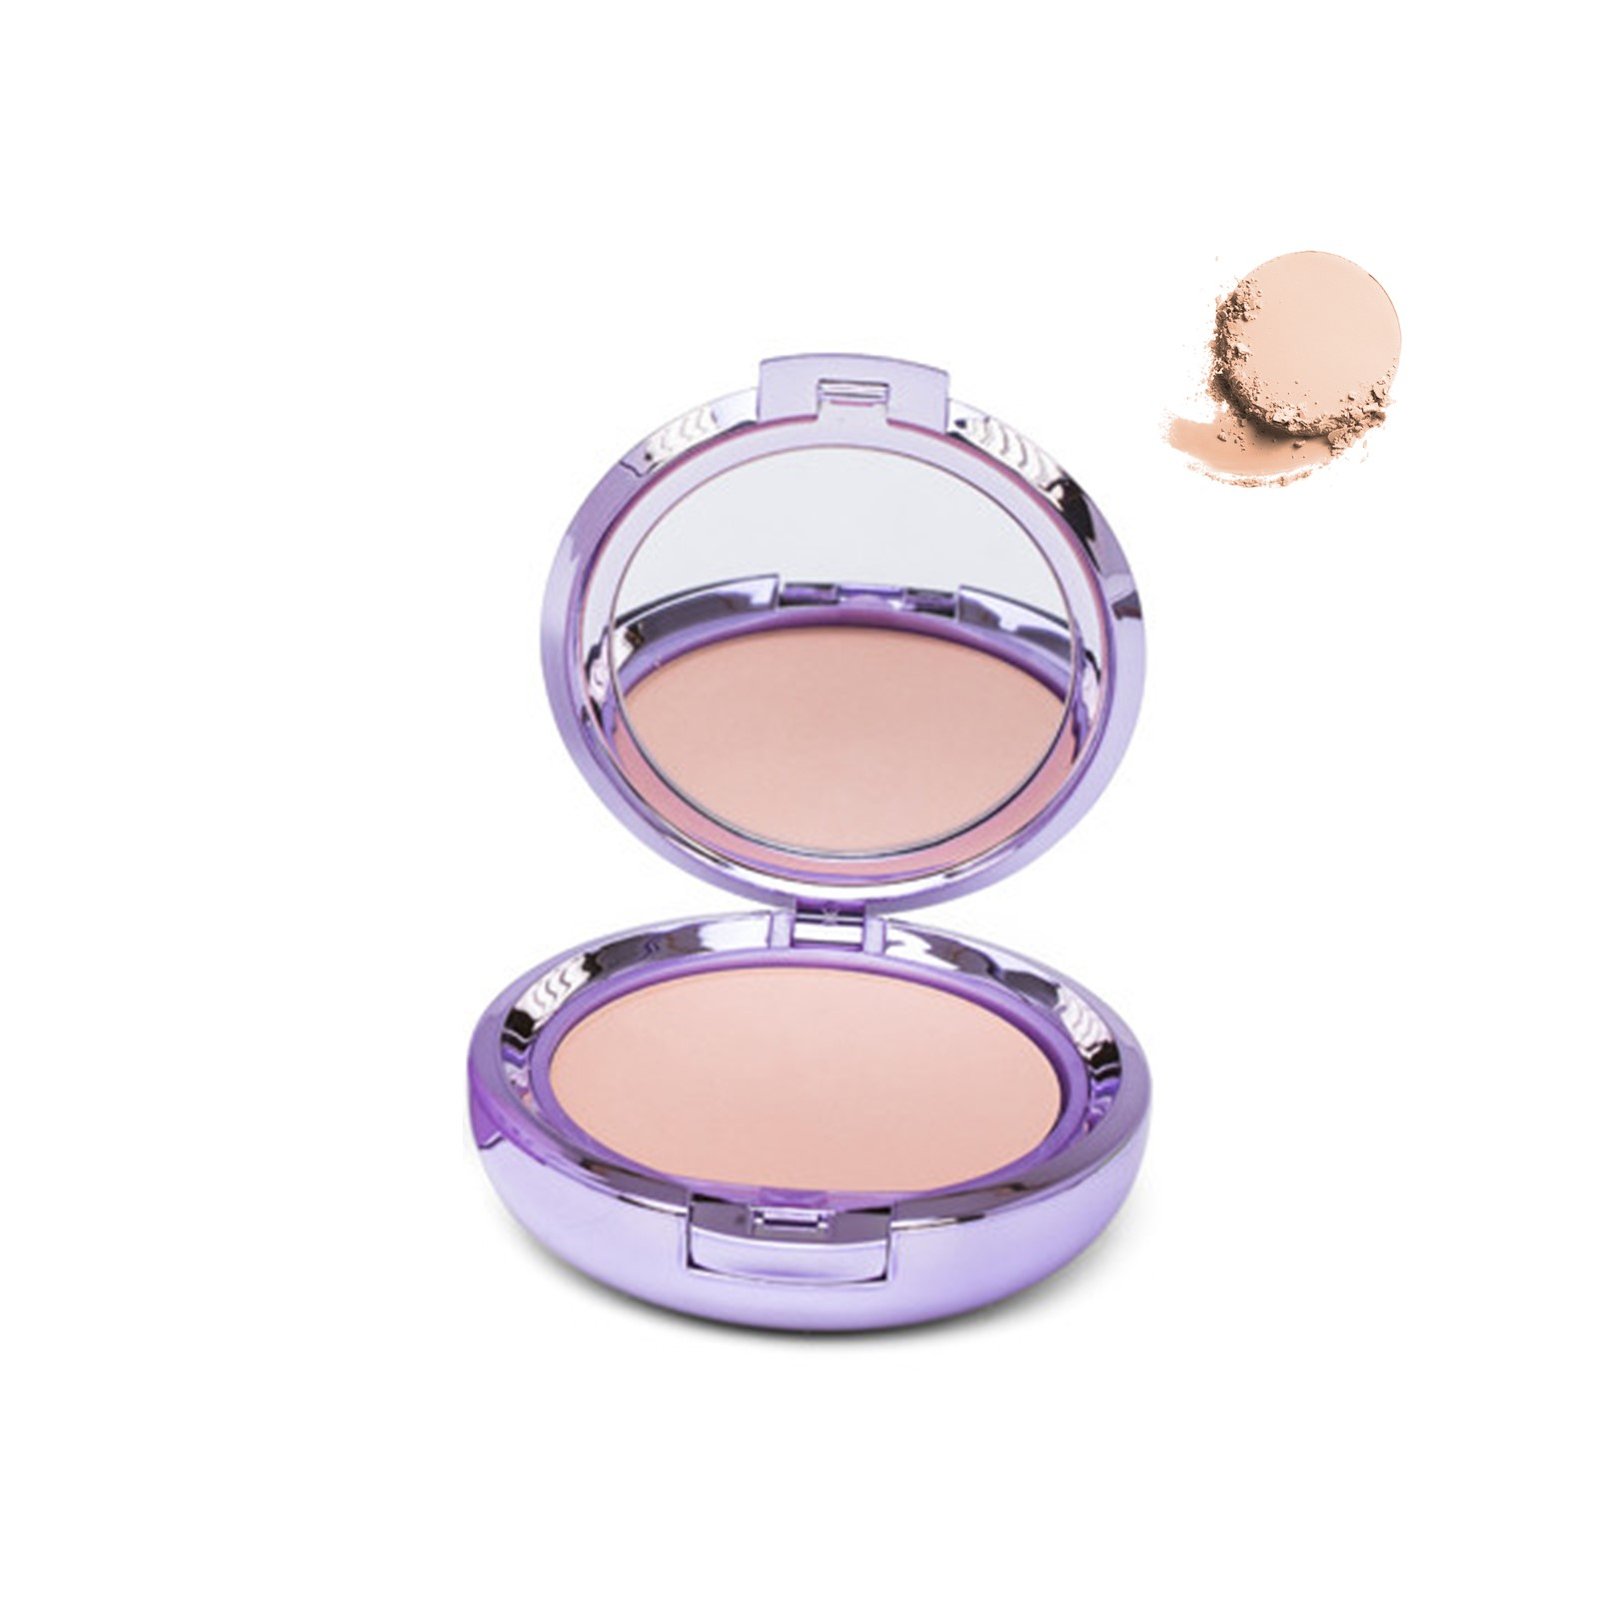 Covermark Compact Powder Normal Skin 3 10g